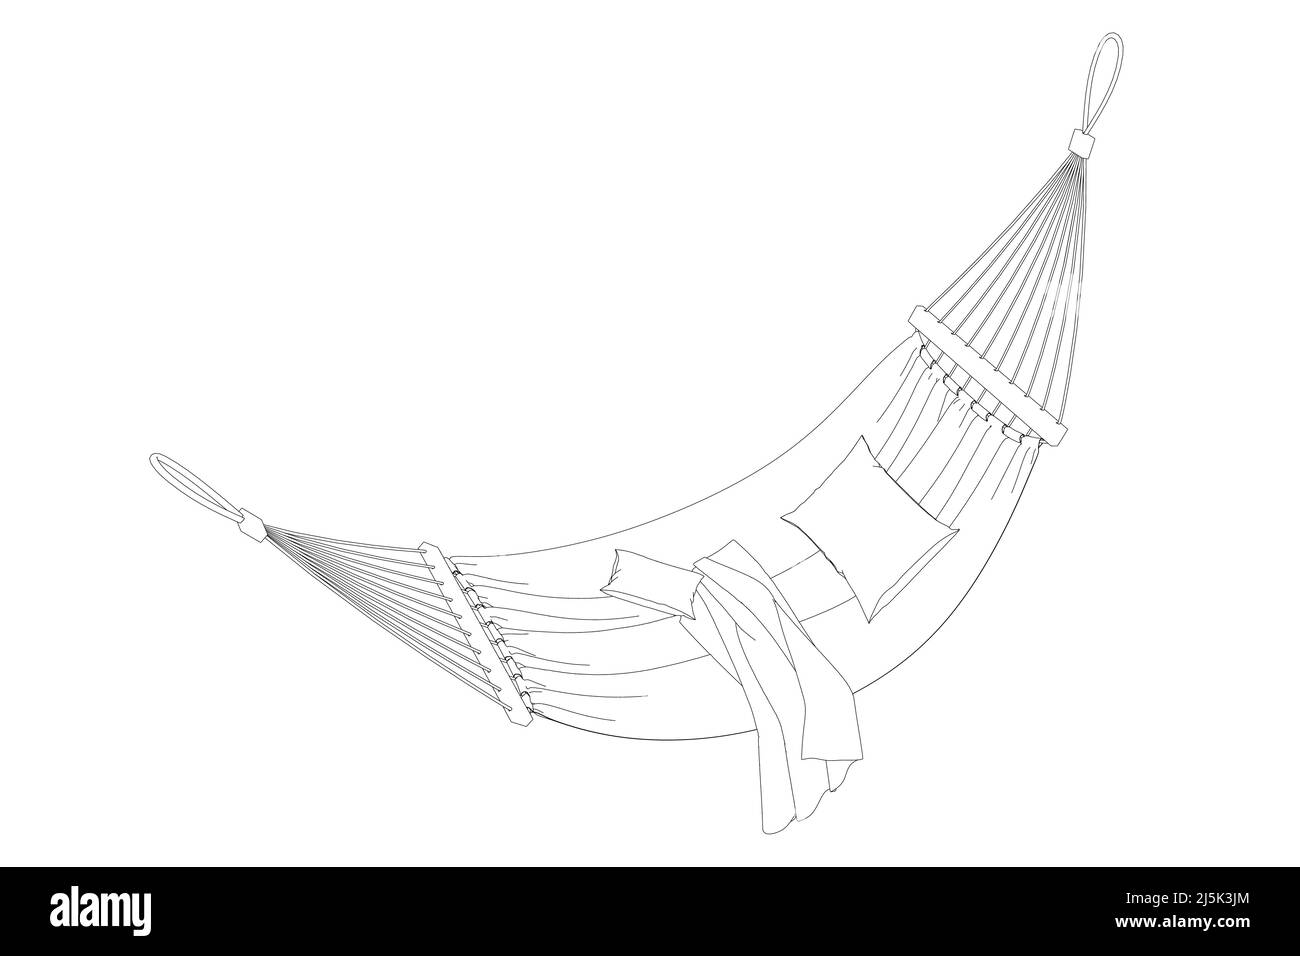 The contour of a hanging bed with a blanket and pillows from black lines isolated on a white background. Isometric view. Vector illustration. Stock Vector